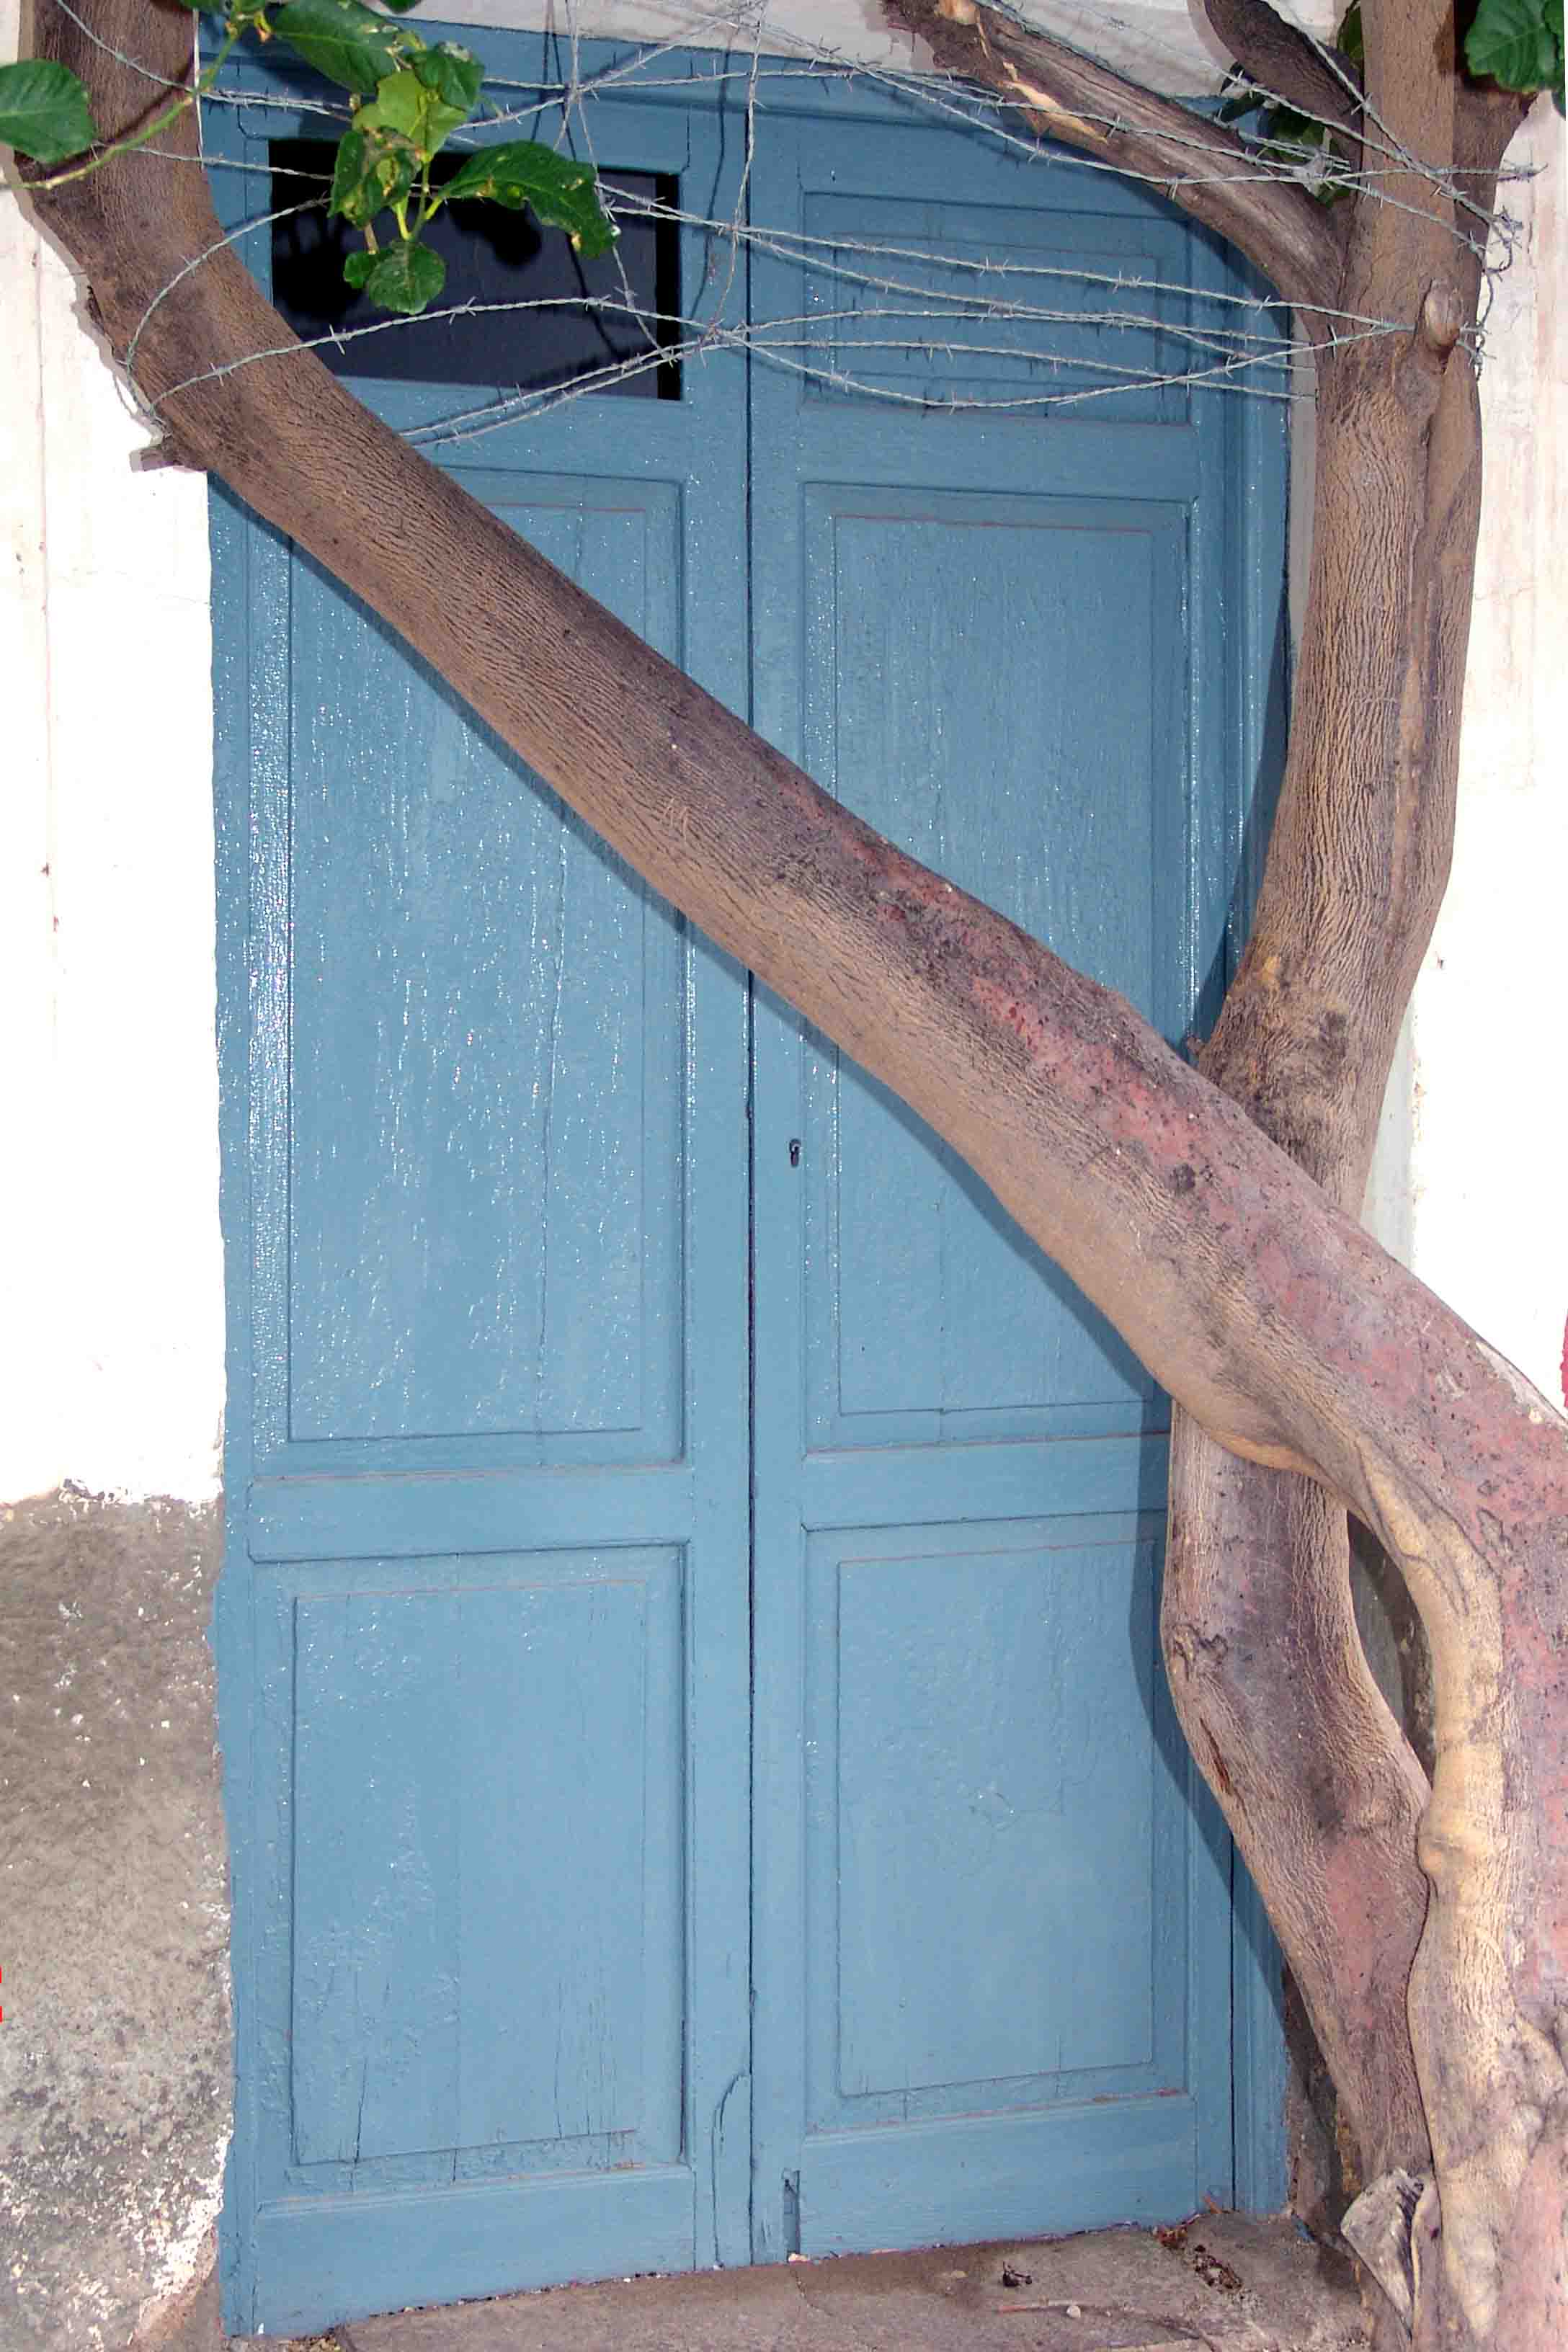 Brench intertwined with door